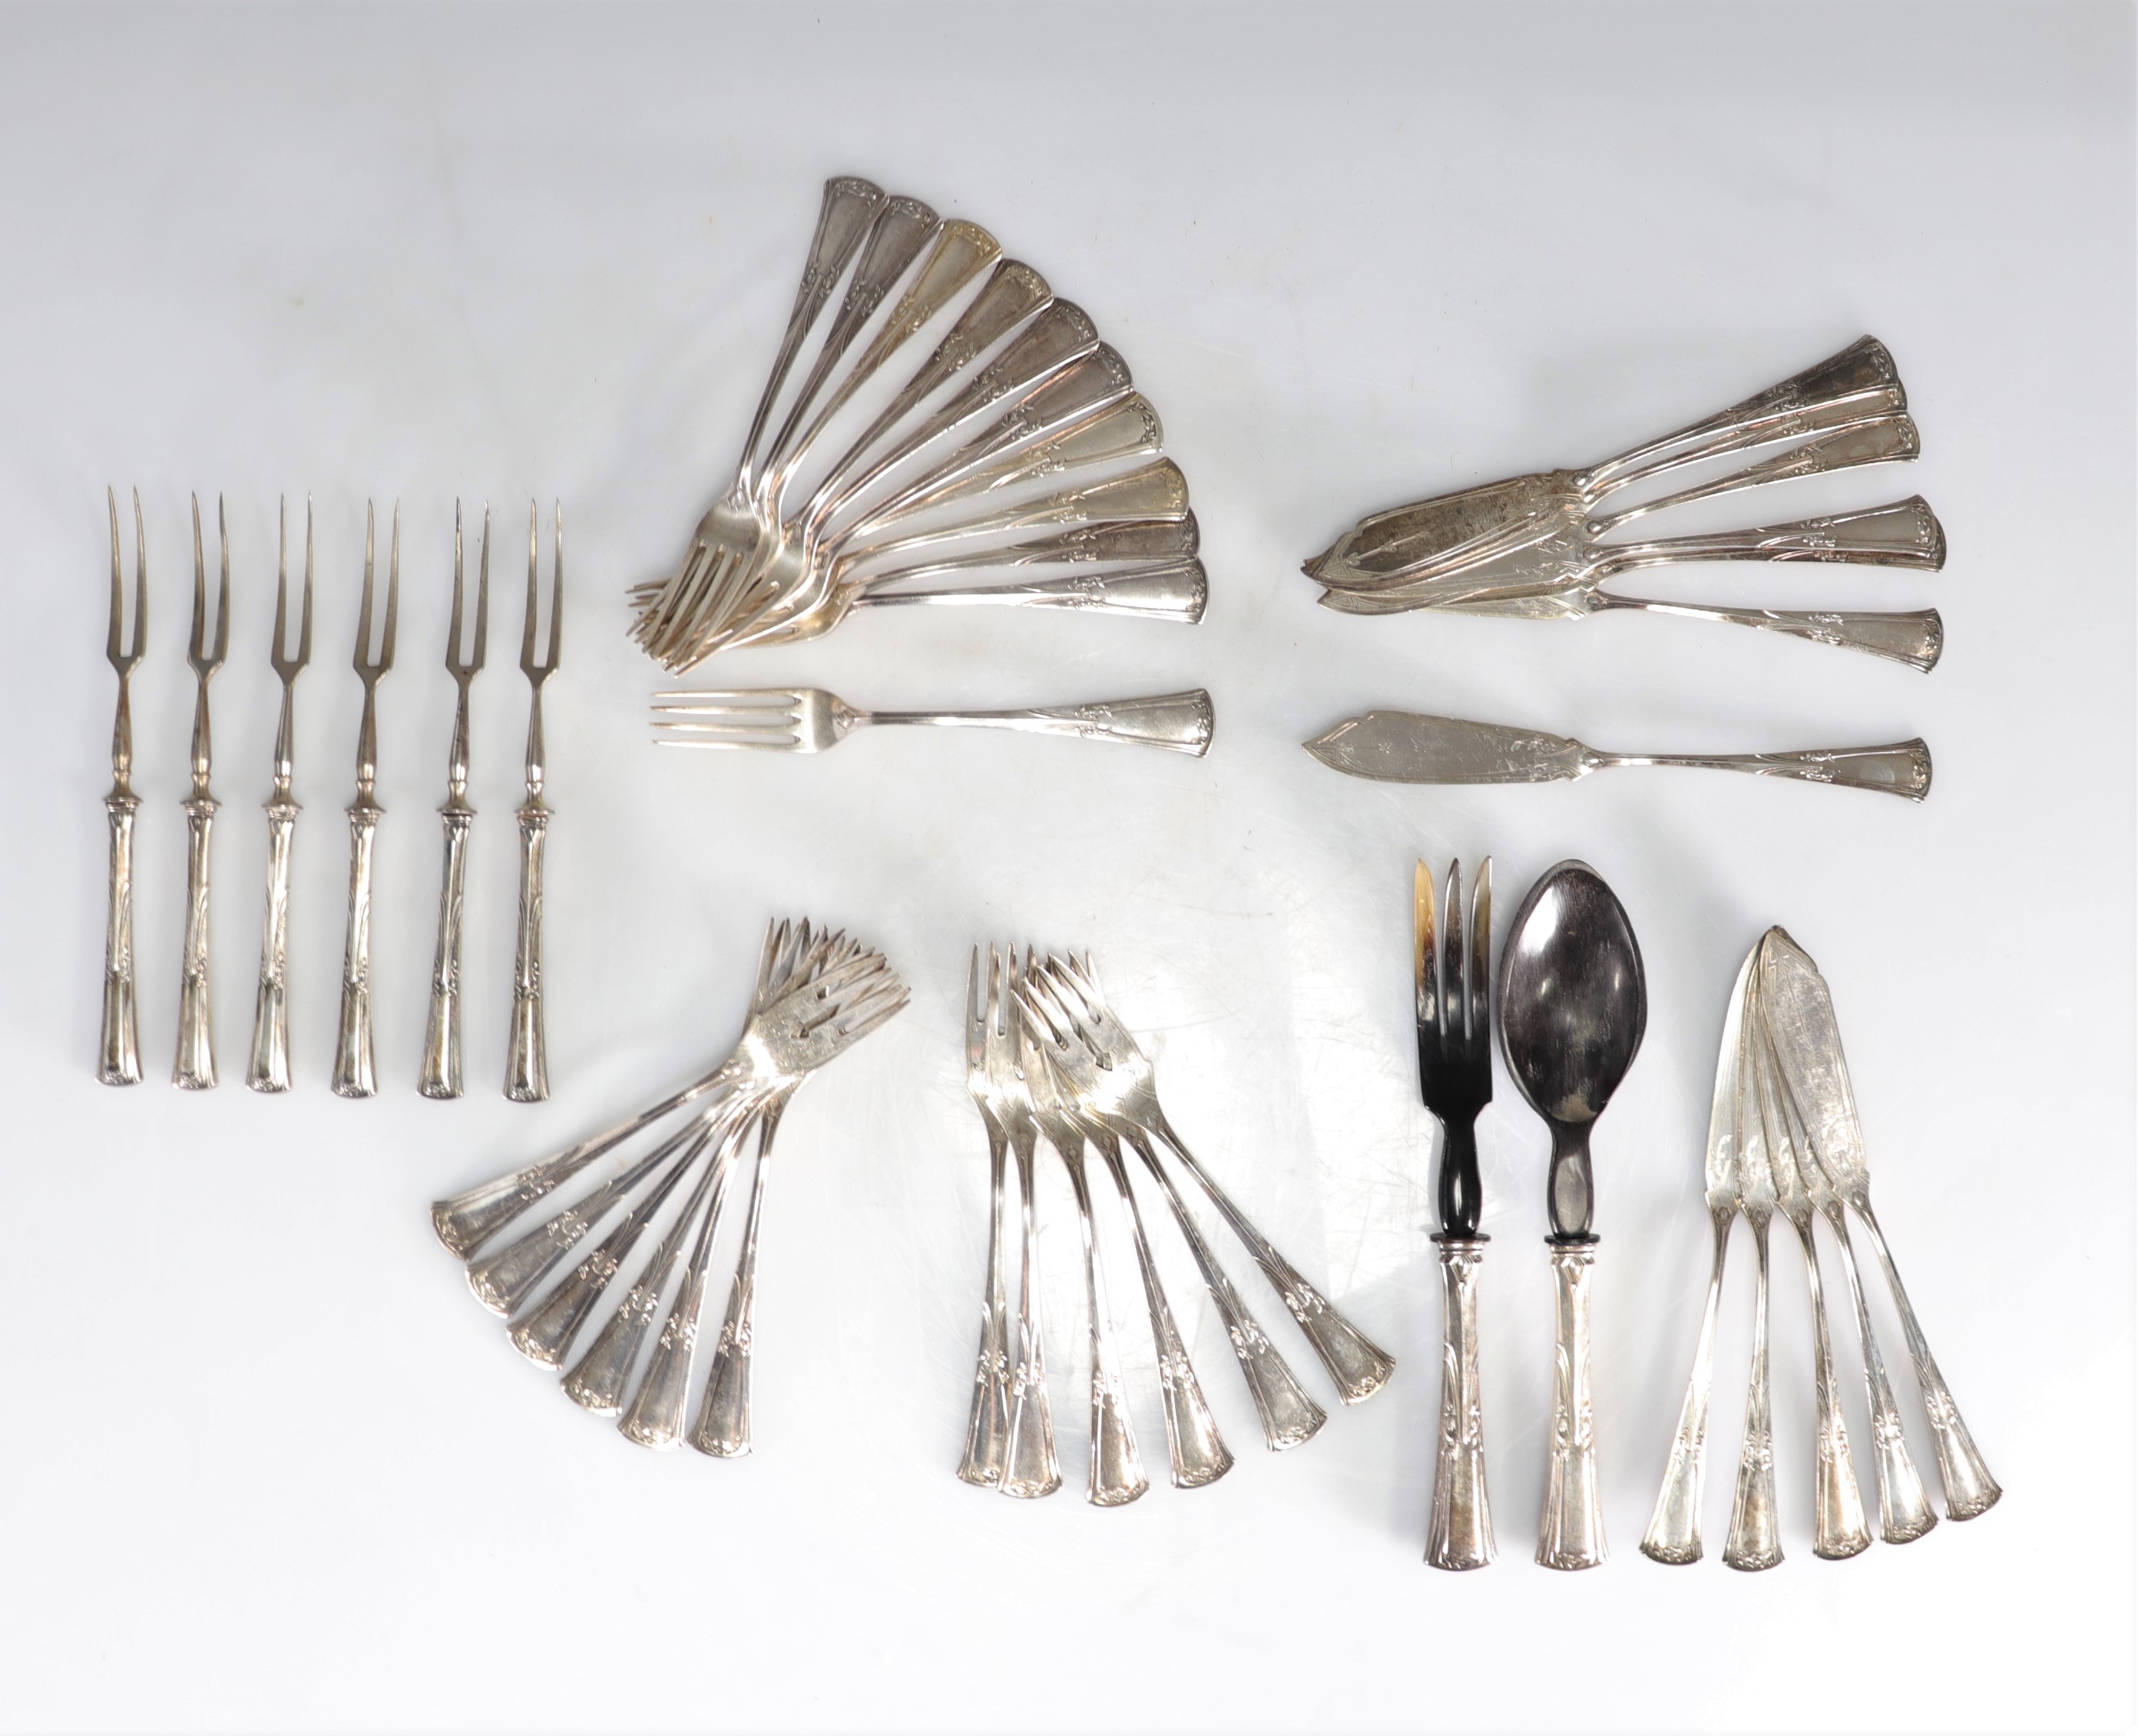 Solid silver cutlery set 5.9kg - Image 2 of 2